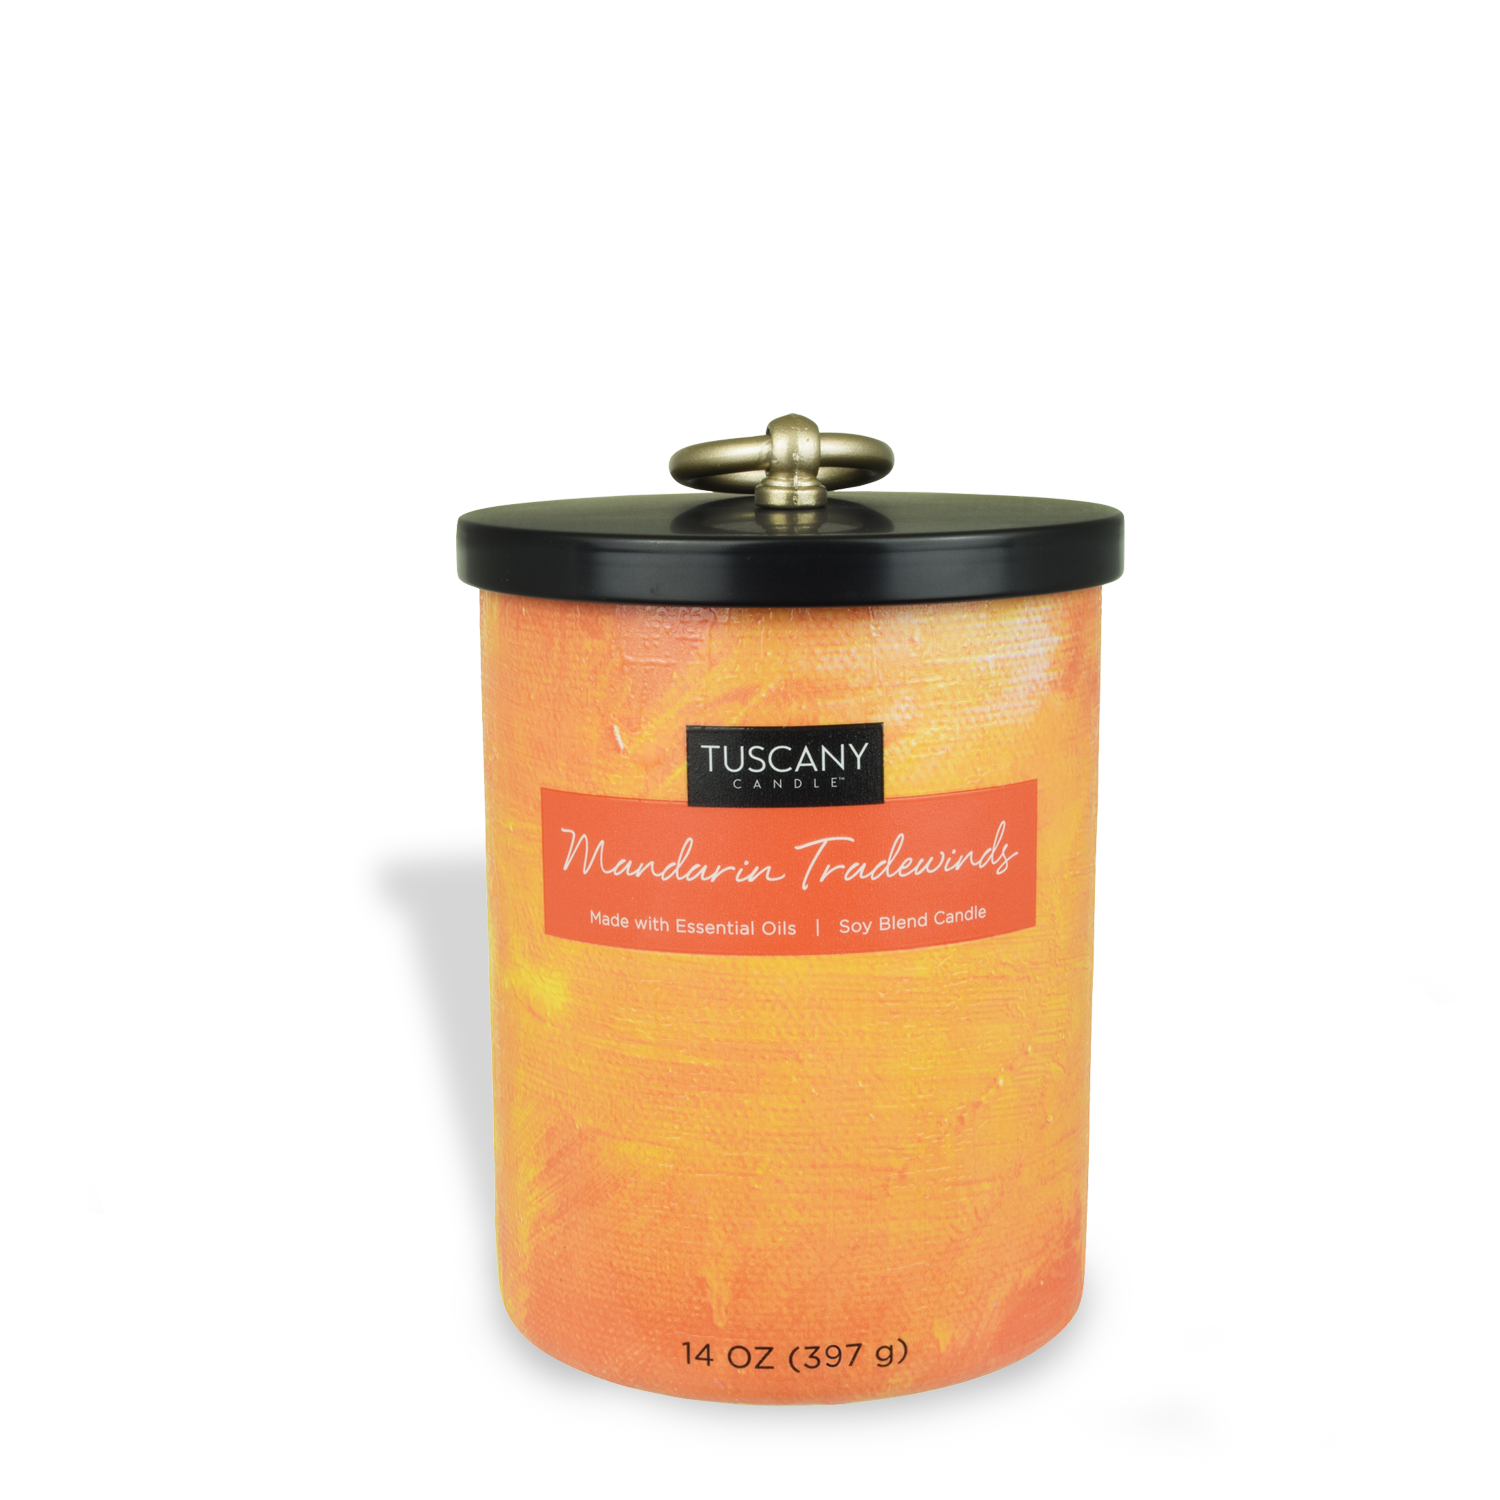 A Tuscany Candle tin container with orange paint on it, perfect for holding Mandarin Tradewinds Scented Jar Candle (14 oz) from the Home Décor Collection and creating a fragrant ambiance.